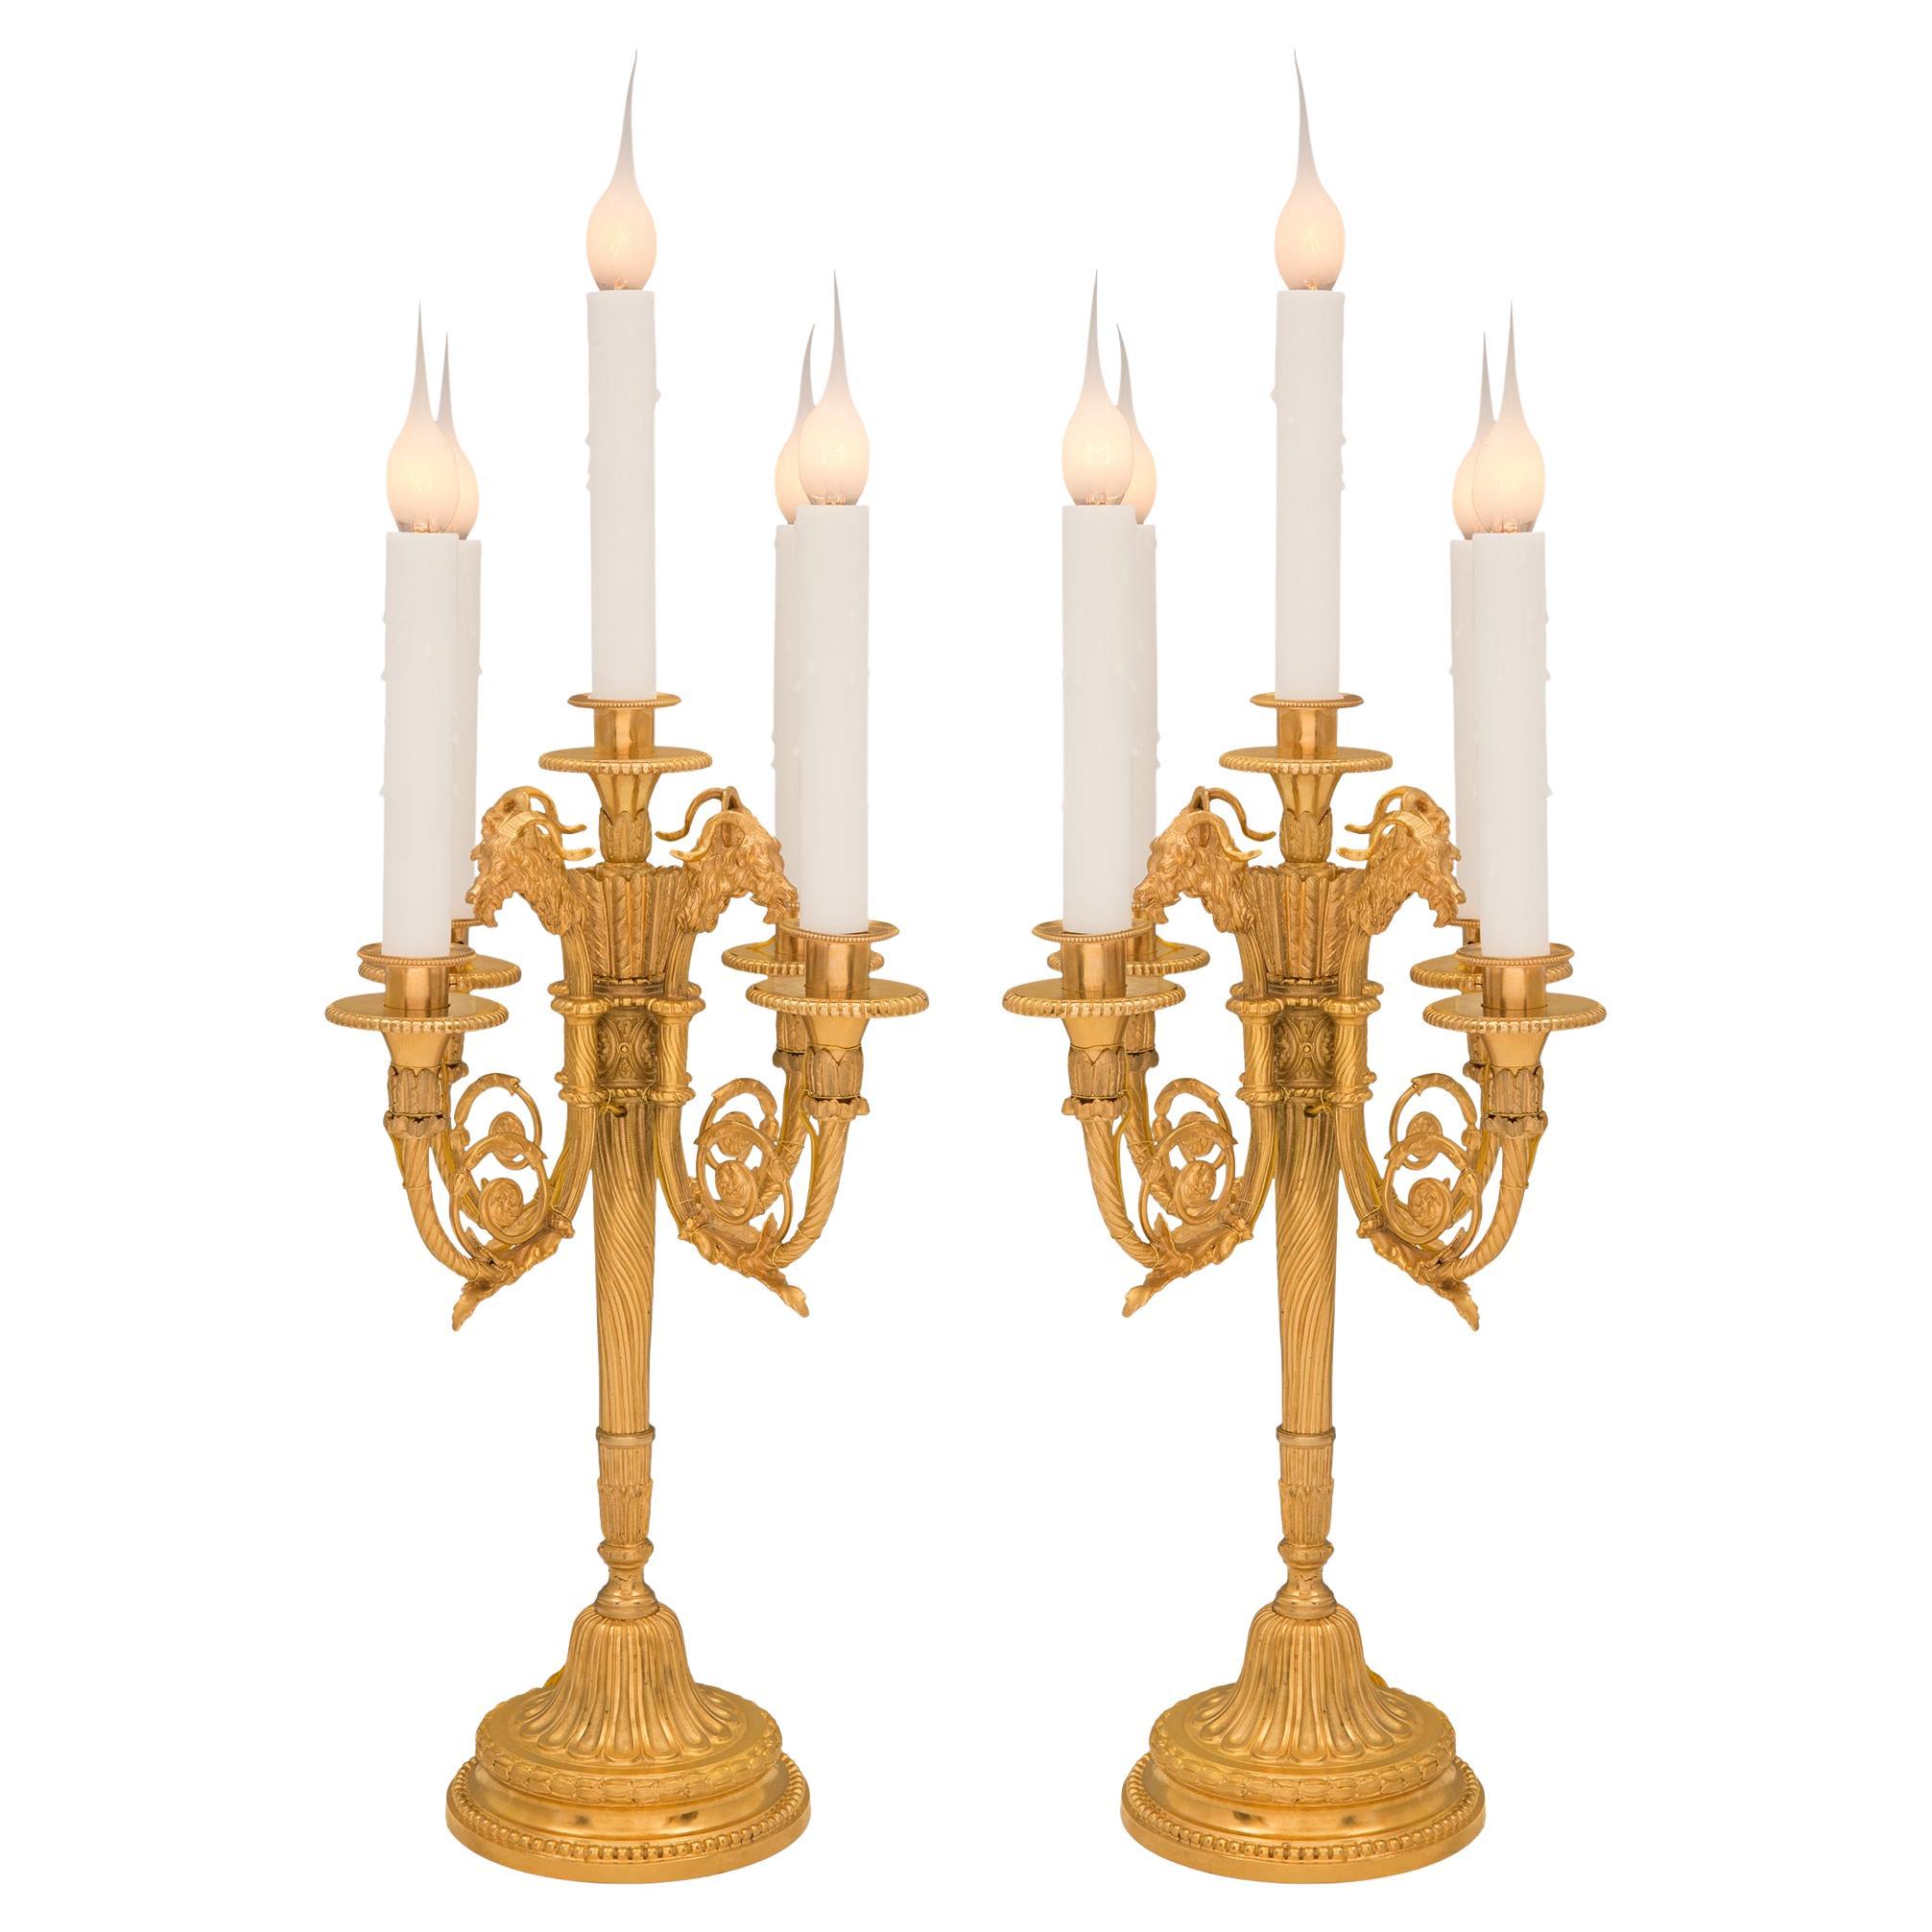 Pair of French 19th Century Louis XVI St. Ormolu Candelabra Lamps For Sale